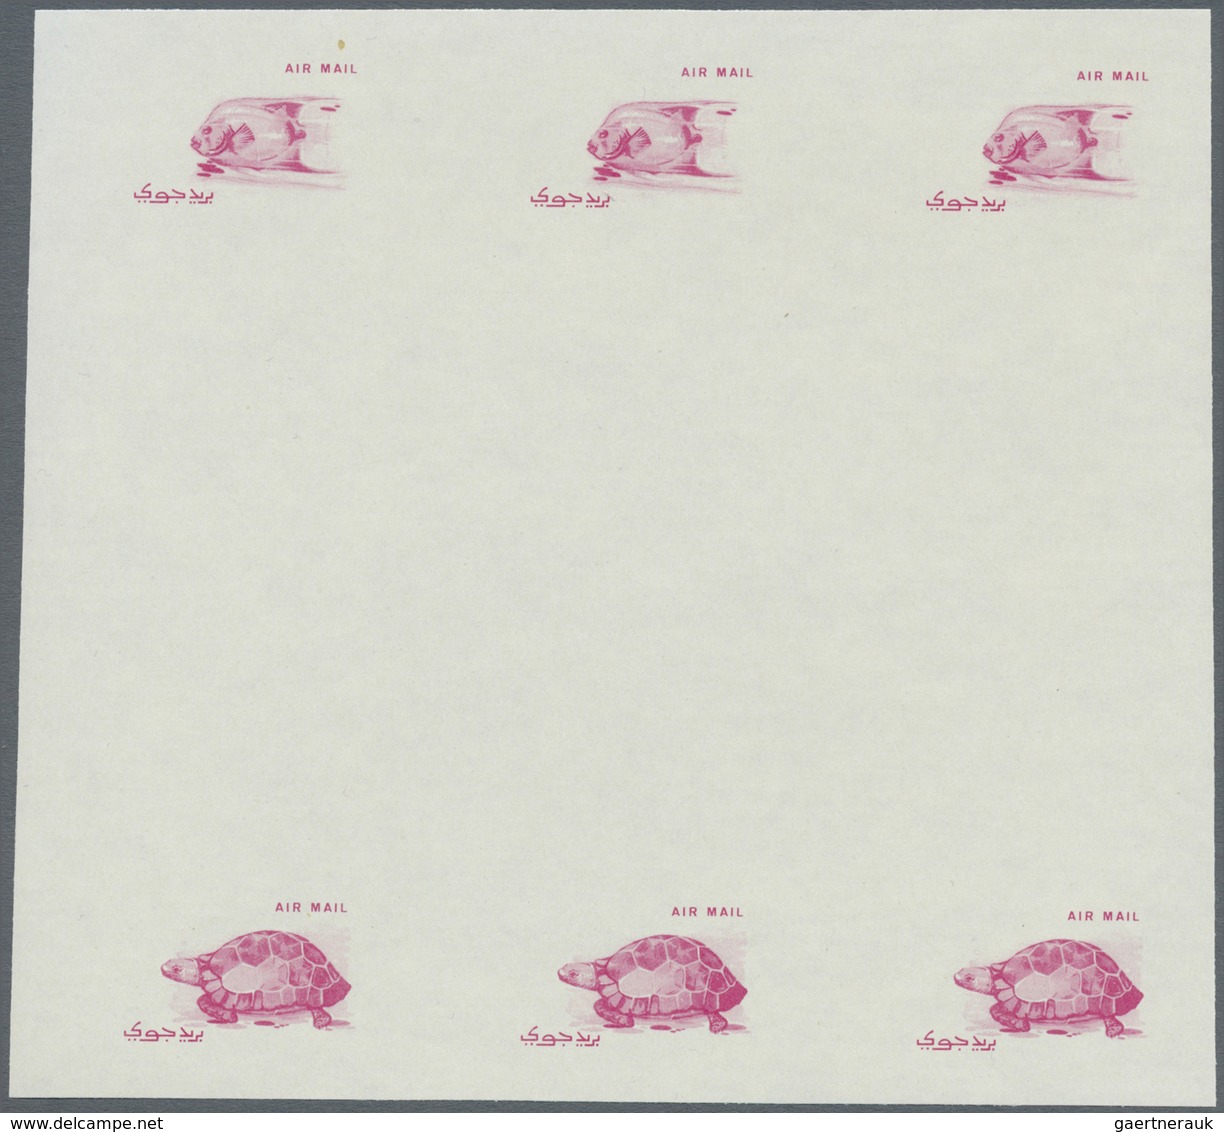 ** Adschman / Ajman: 1965, Definitives 'Indigenous Fauna' 50np. Fish (Pomacanthodes Maculosius) And 75n - Ajman